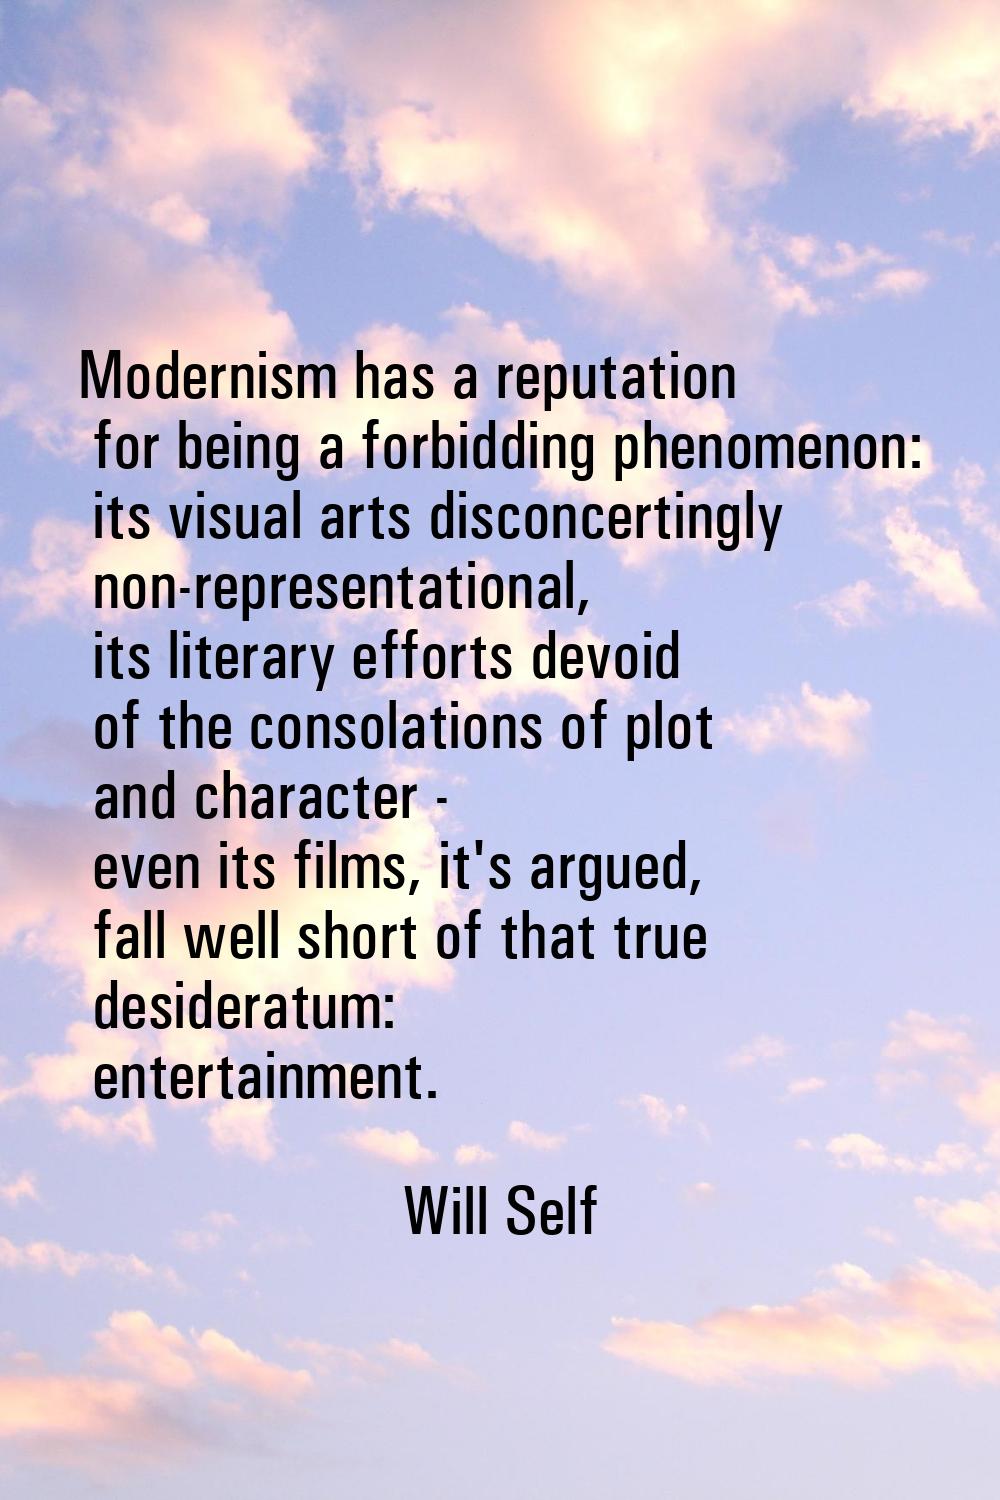 Modernism has a reputation for being a forbidding phenomenon: its visual arts disconcertingly non-r